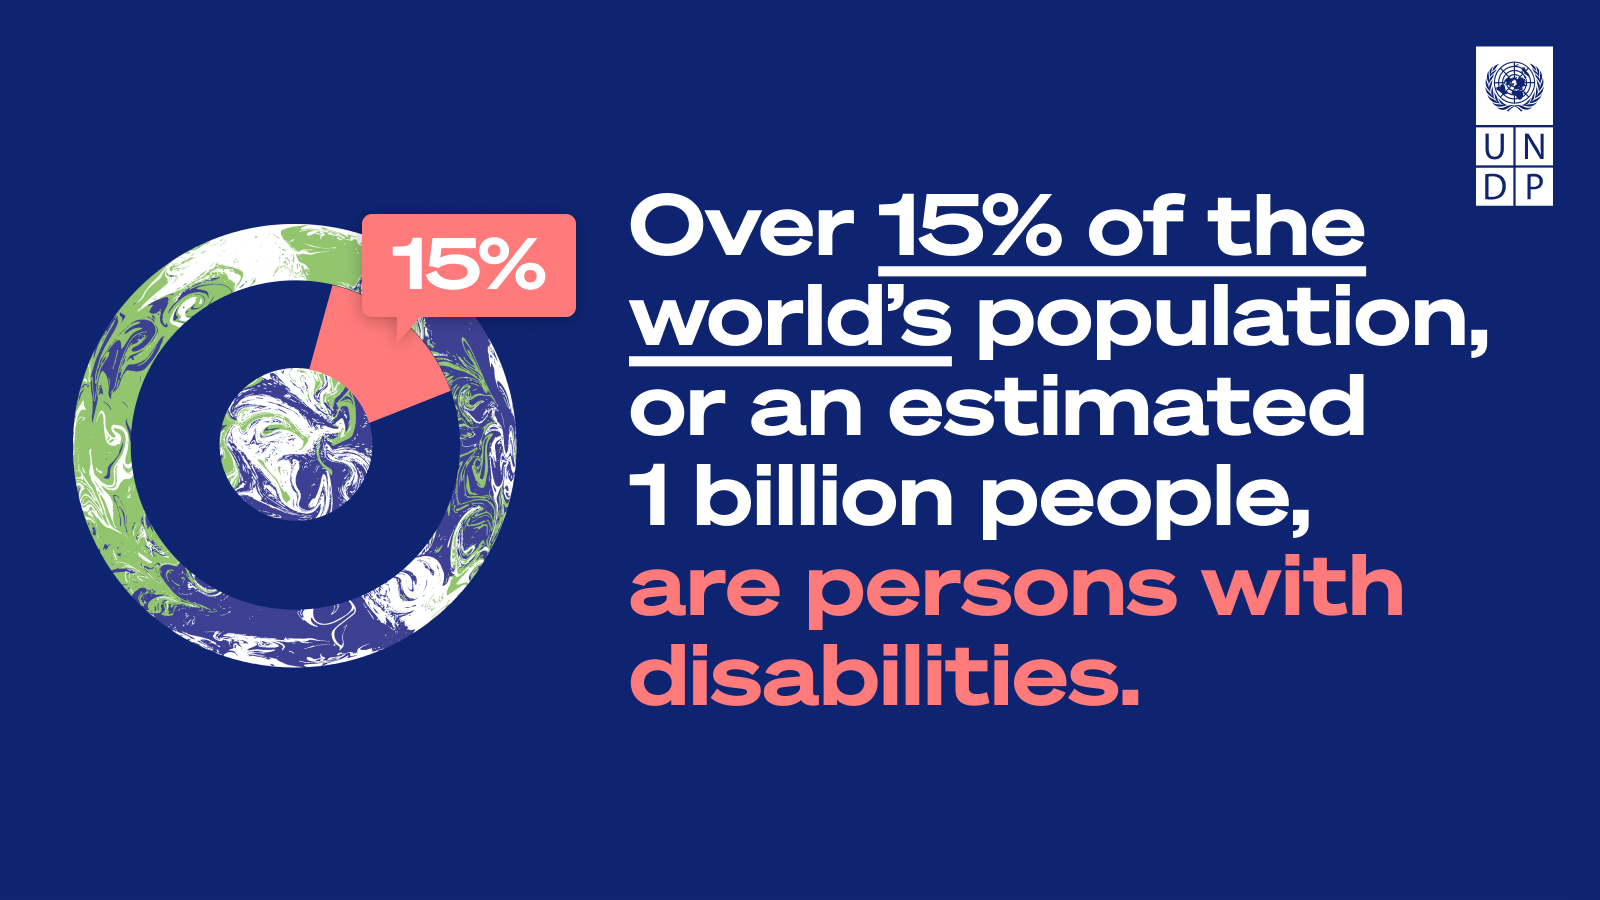 Graphic: Over 15% of the world's population are persons with disabilities.